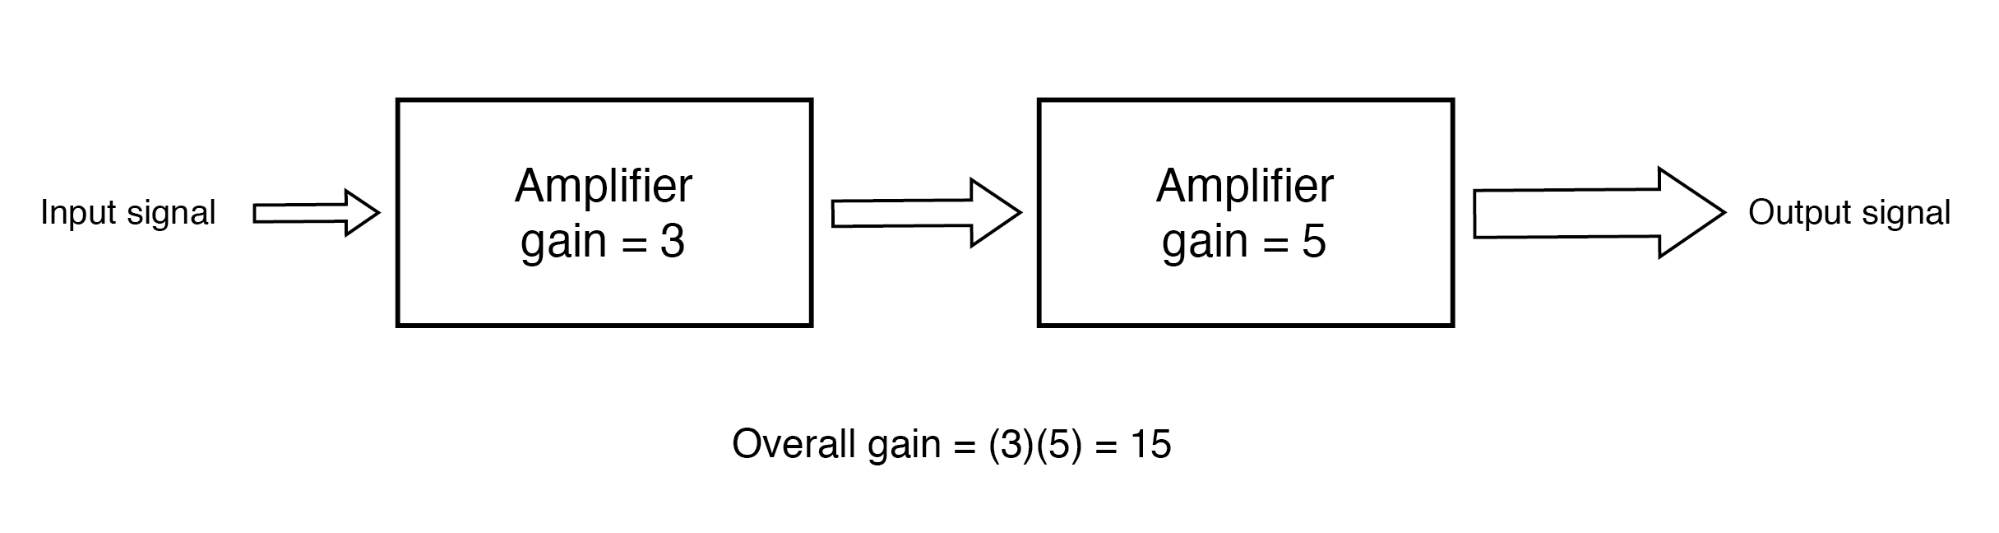 The gain of a chain of cascaded amplifiers is the product of the individual gains.